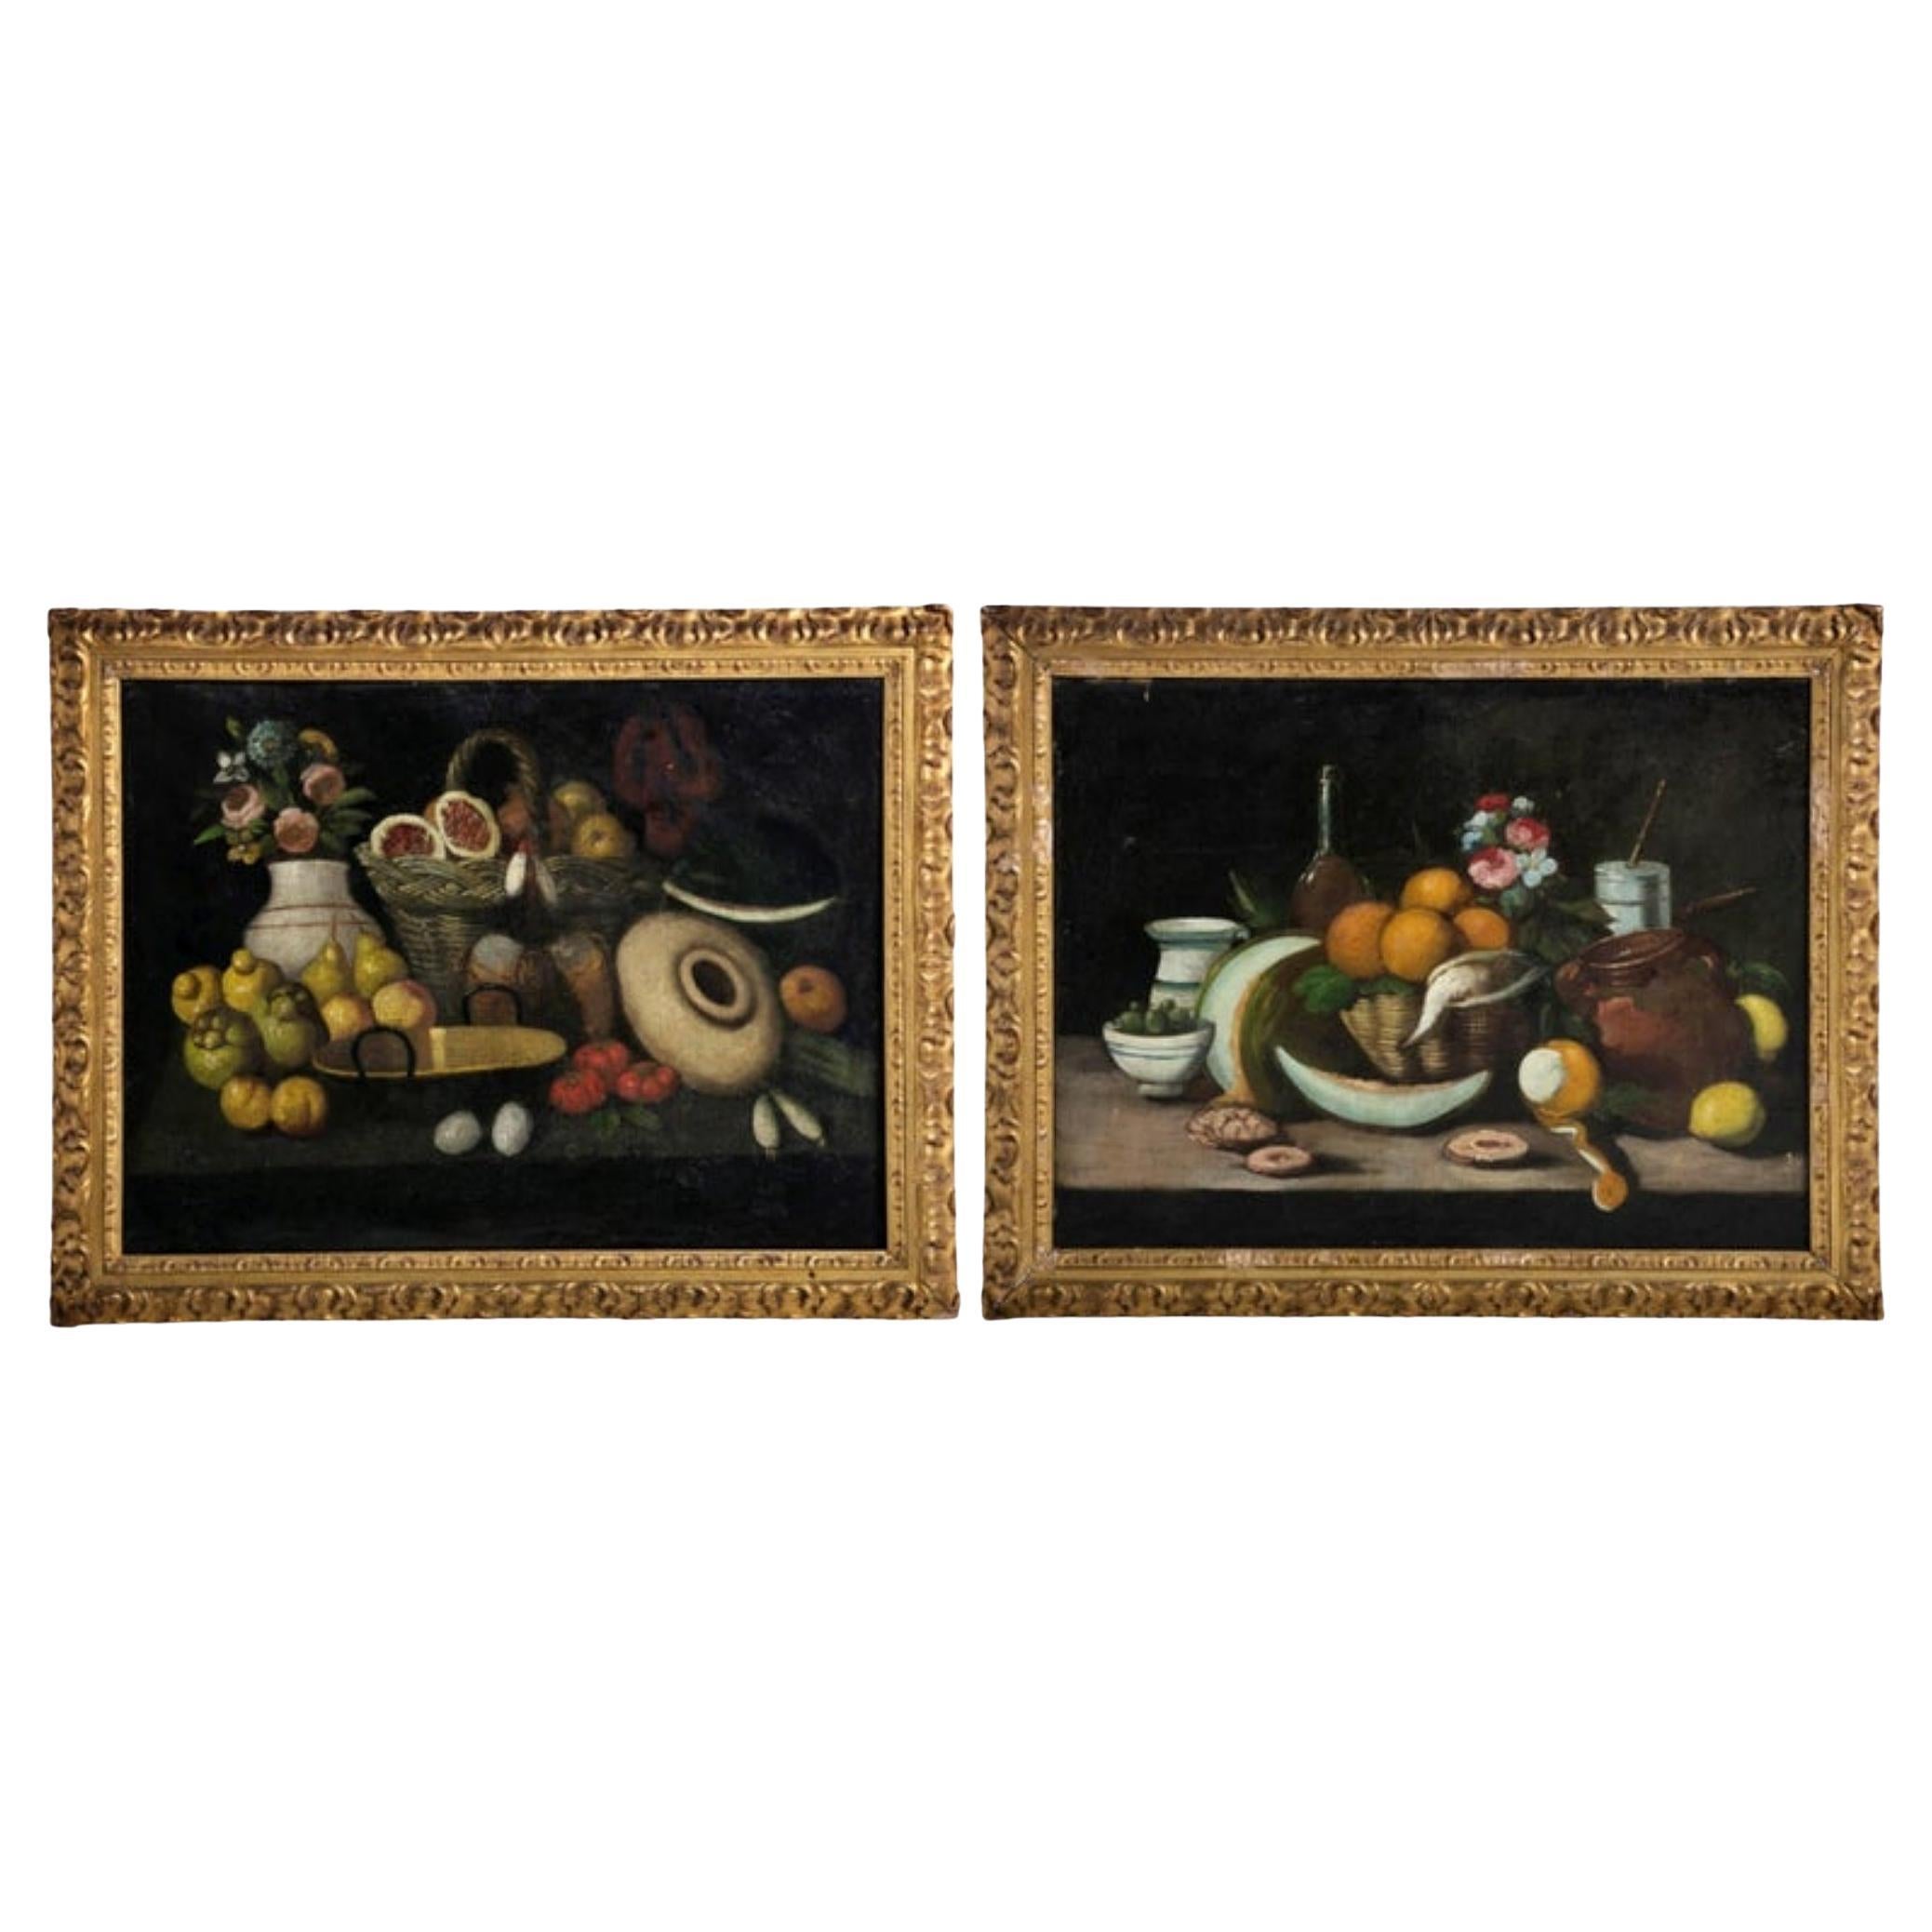 Pair of Spanish School Paintings of the 17th Century "Still Lifes"